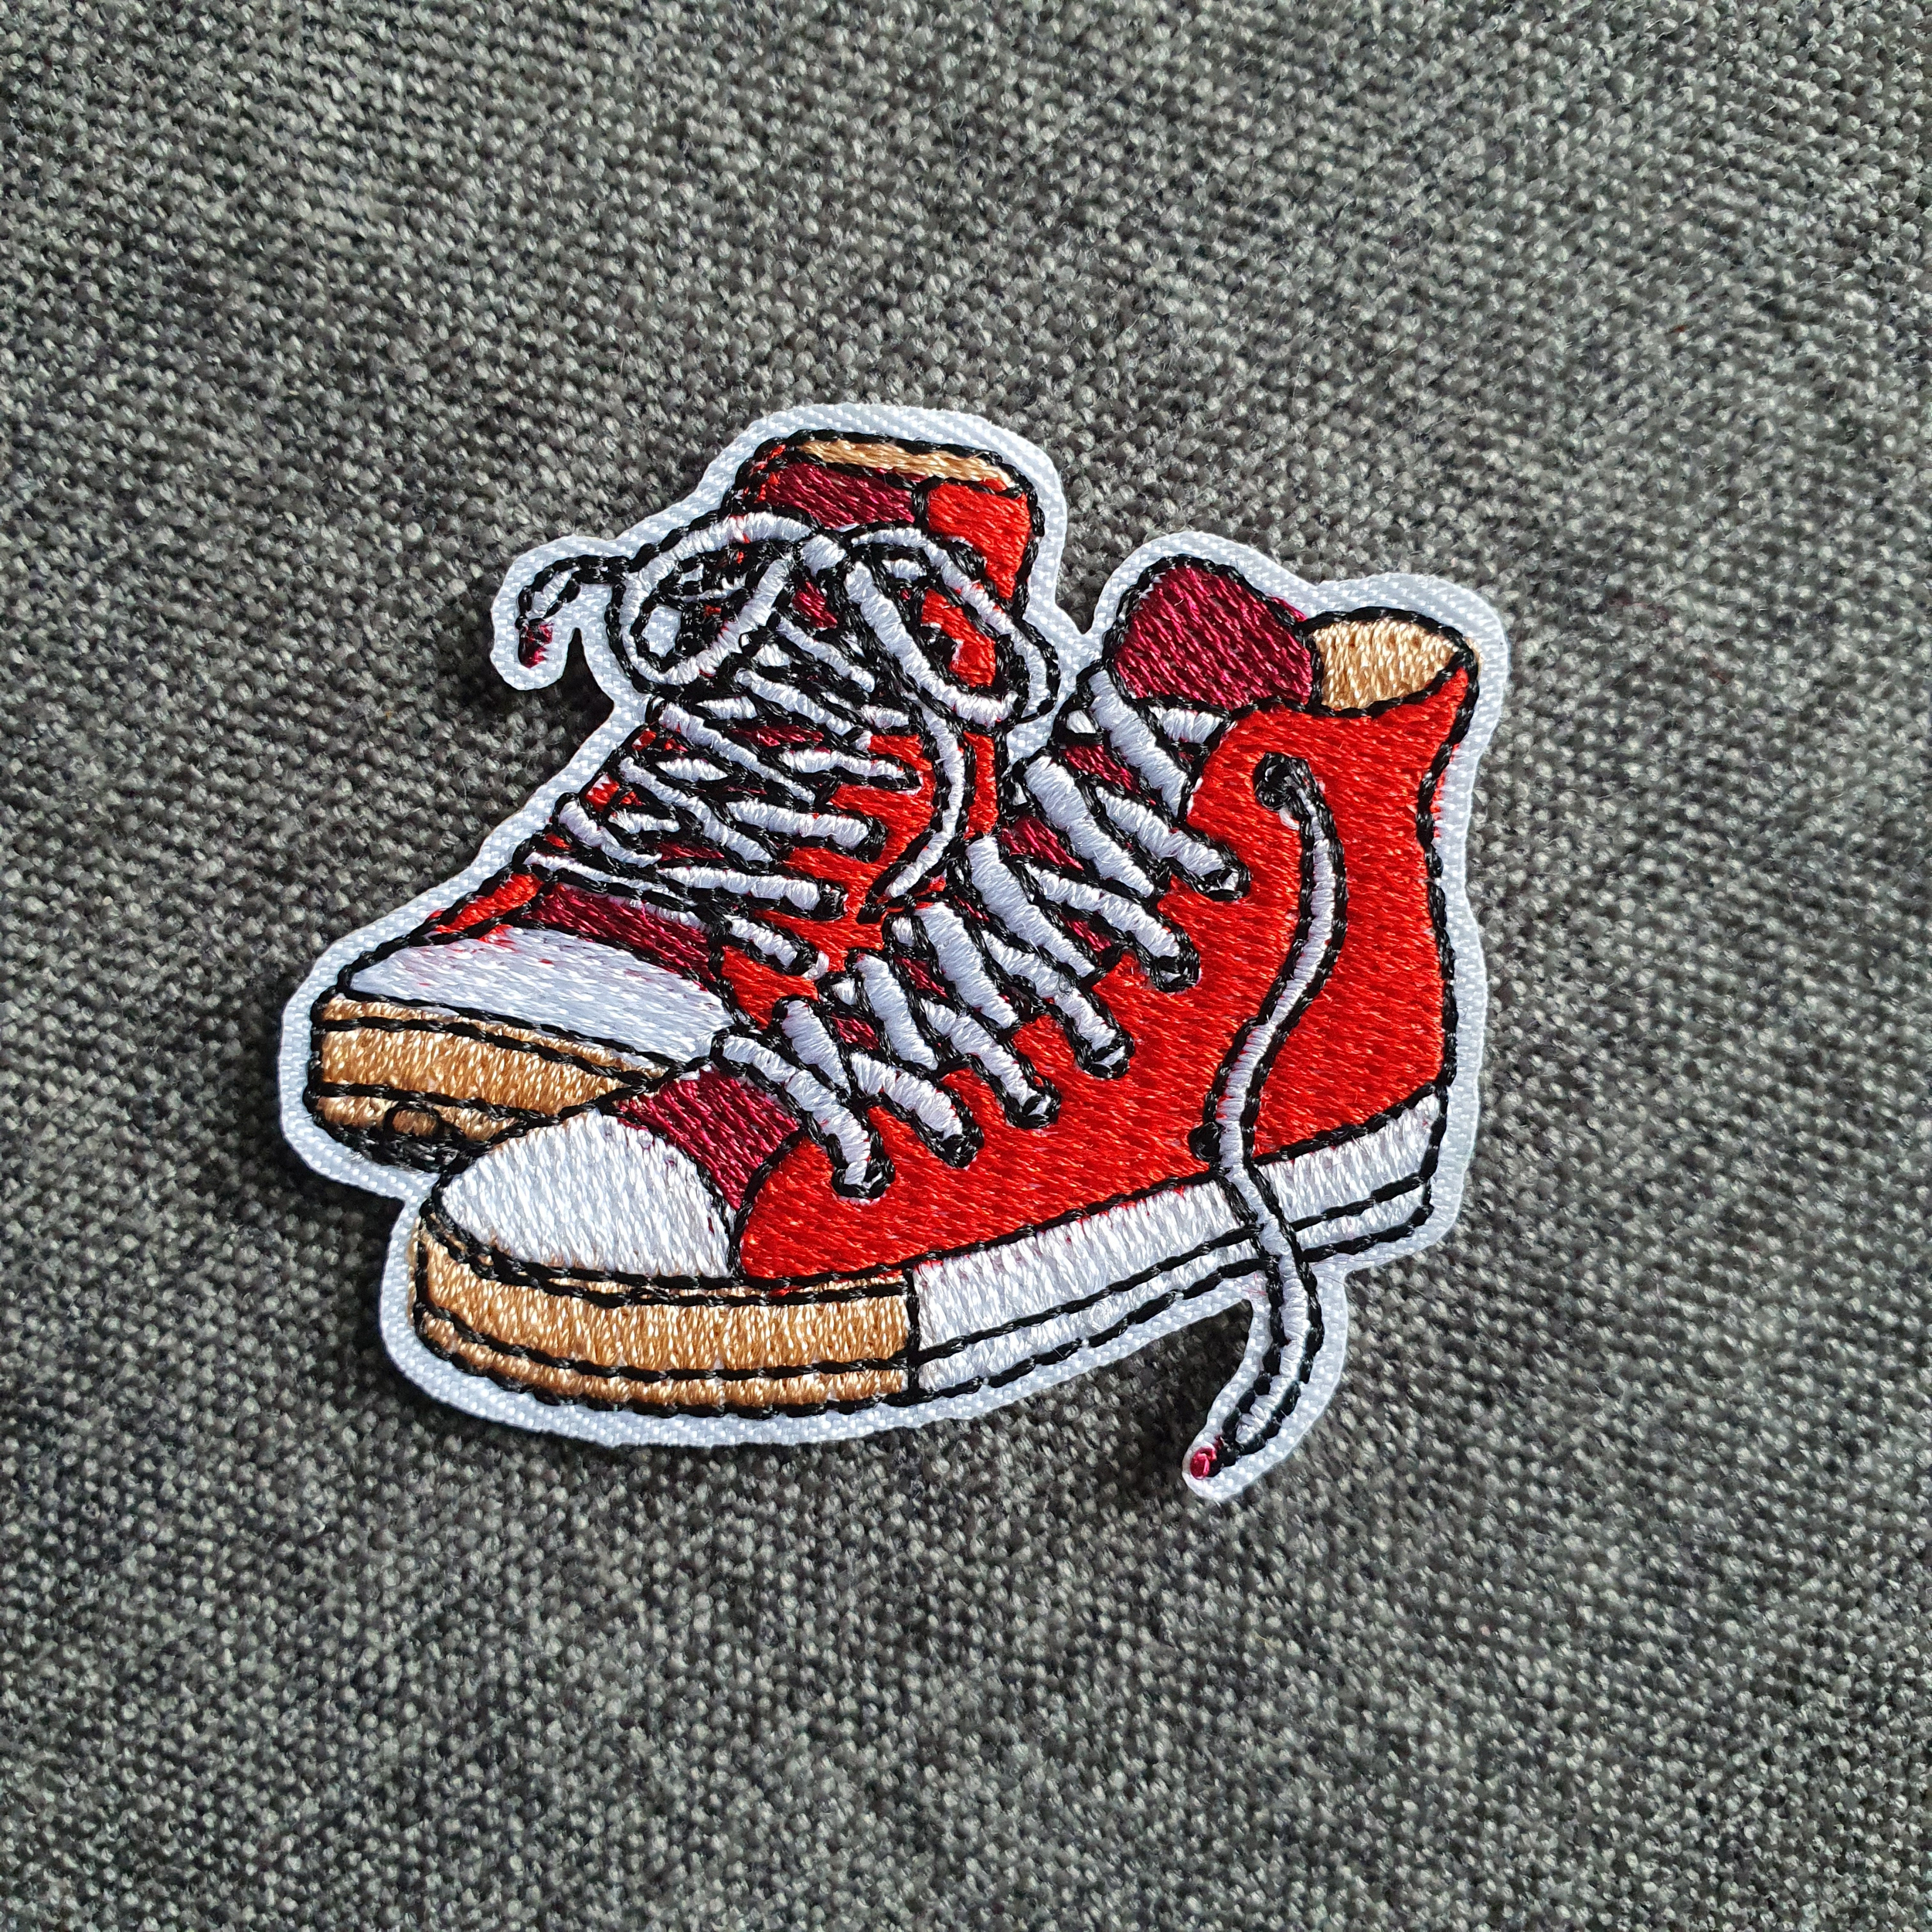 Patch thermocollant basket toile montante rouge style converse (1)